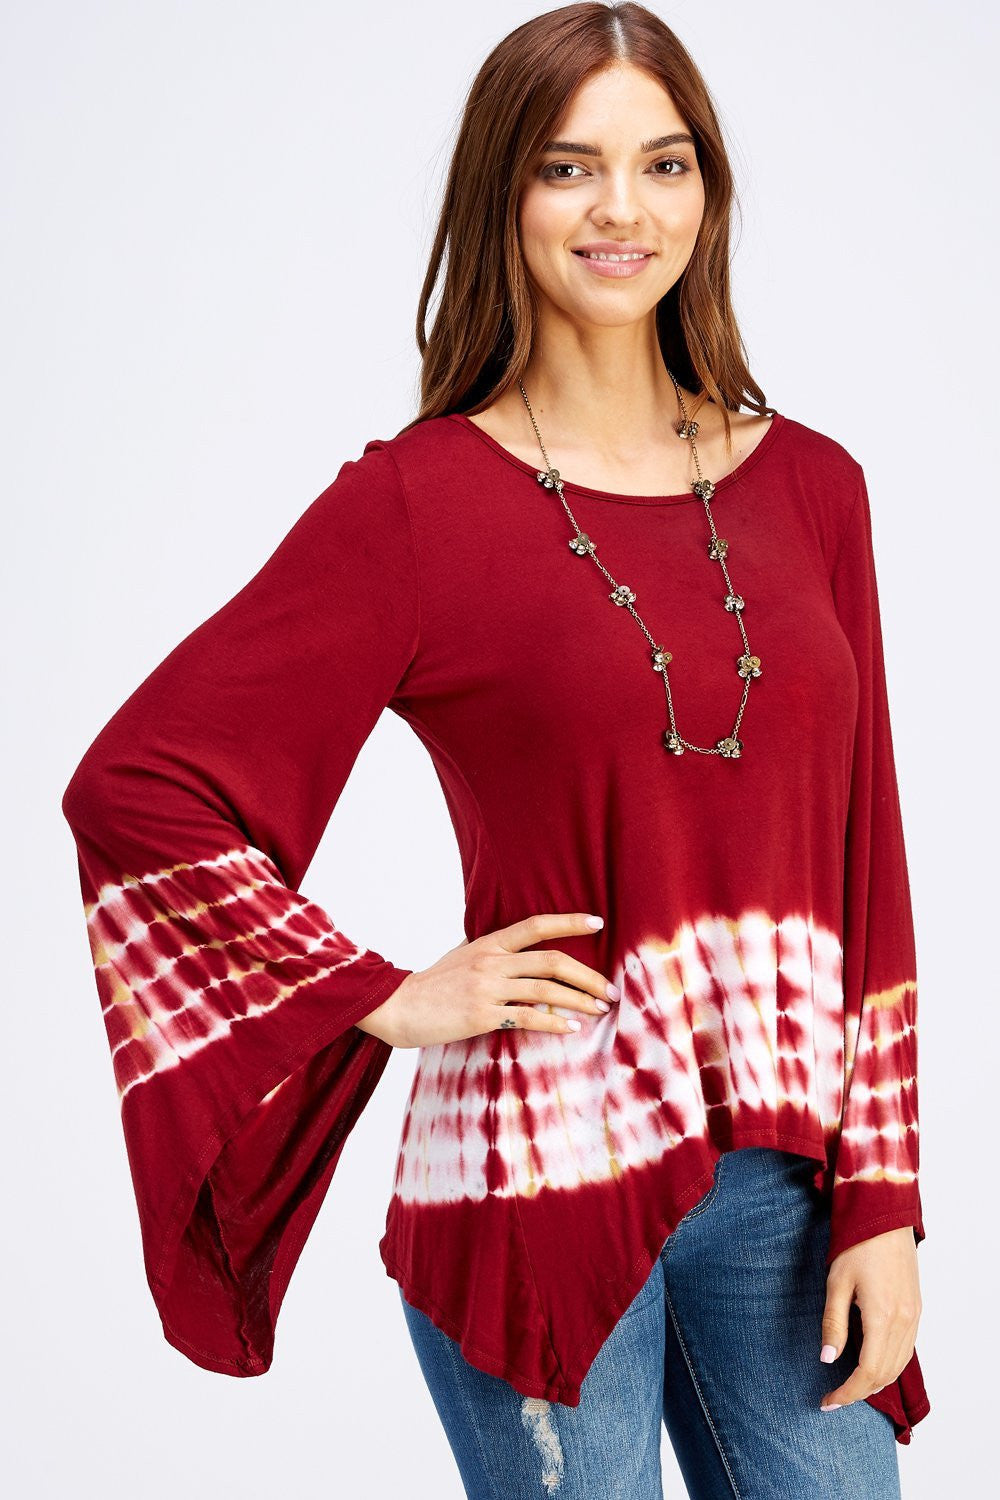 Amazing Crimson & White Bamboo tie dye Blouse with Kimono Bell Sleeves Perfect for any activity,relaxing day,beautiful and unique,comfortable and flattering